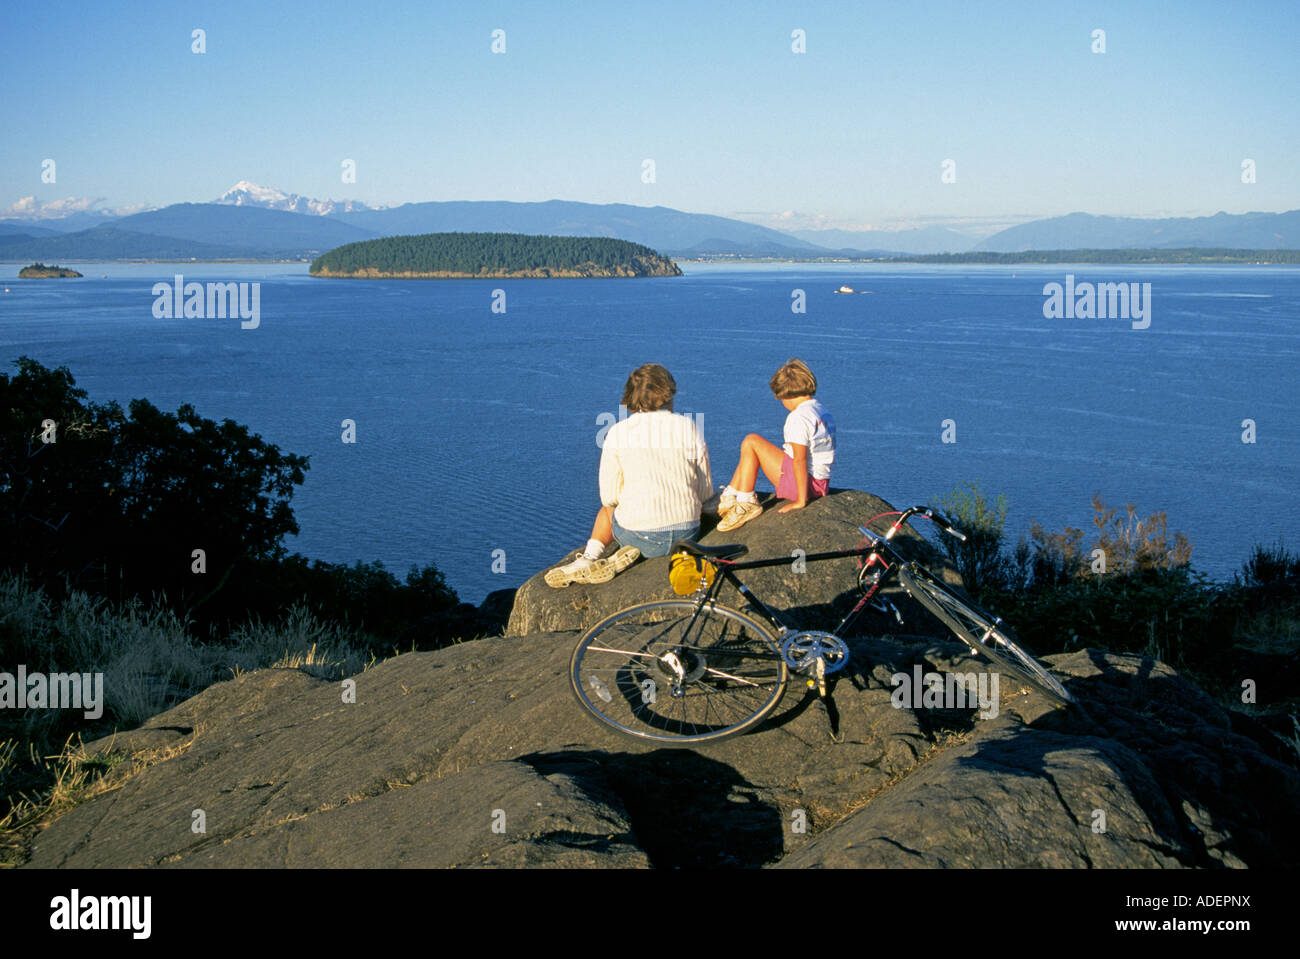 A mother and daughter on bicycles look for whales in Puget Sound in the San Juan Islands, Washington. Stock Photo